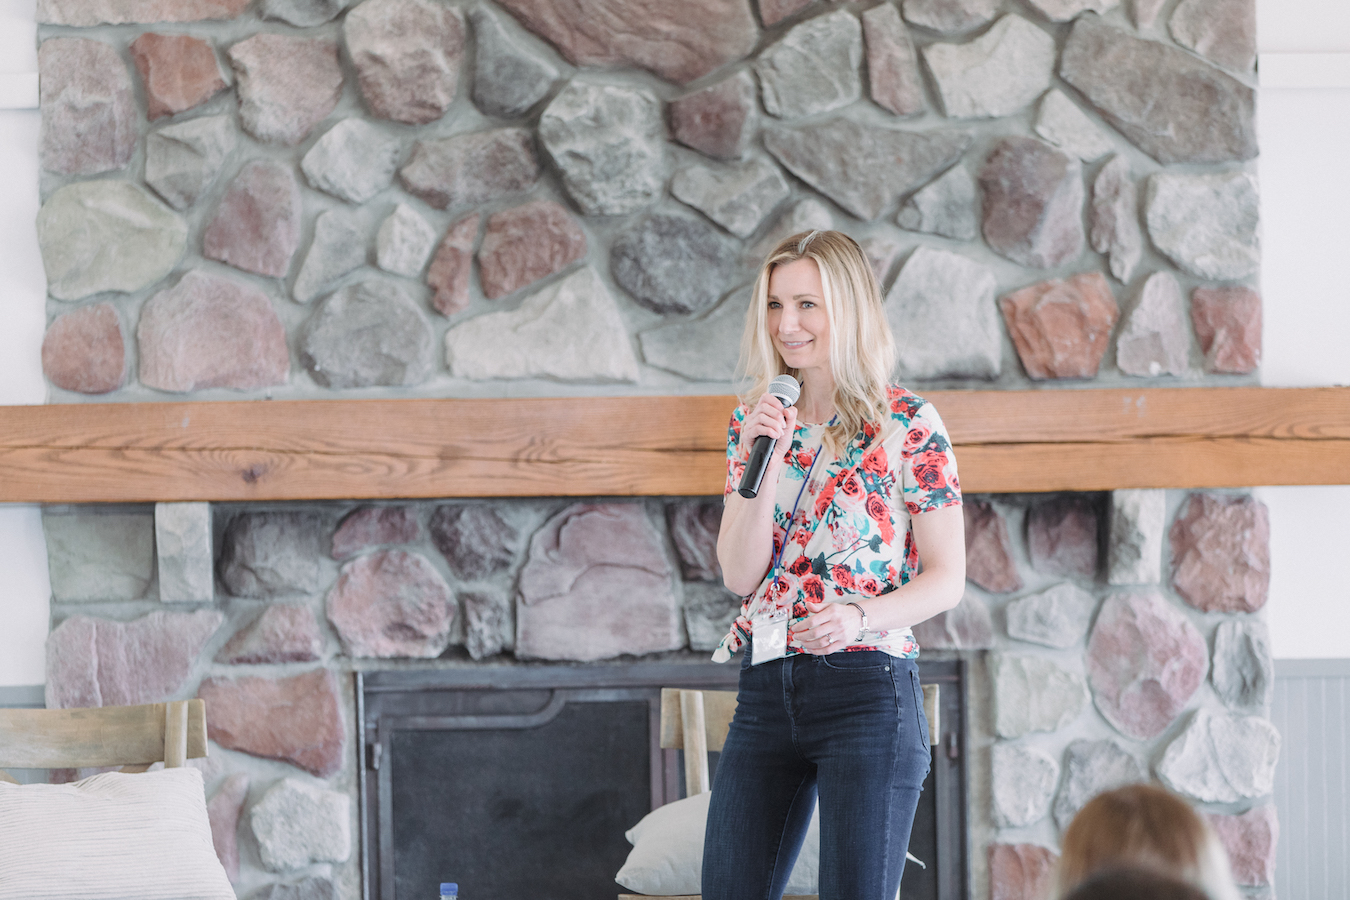 Brittney Suttle on stage speaking at The Haven Conference in West Olive, Michigan